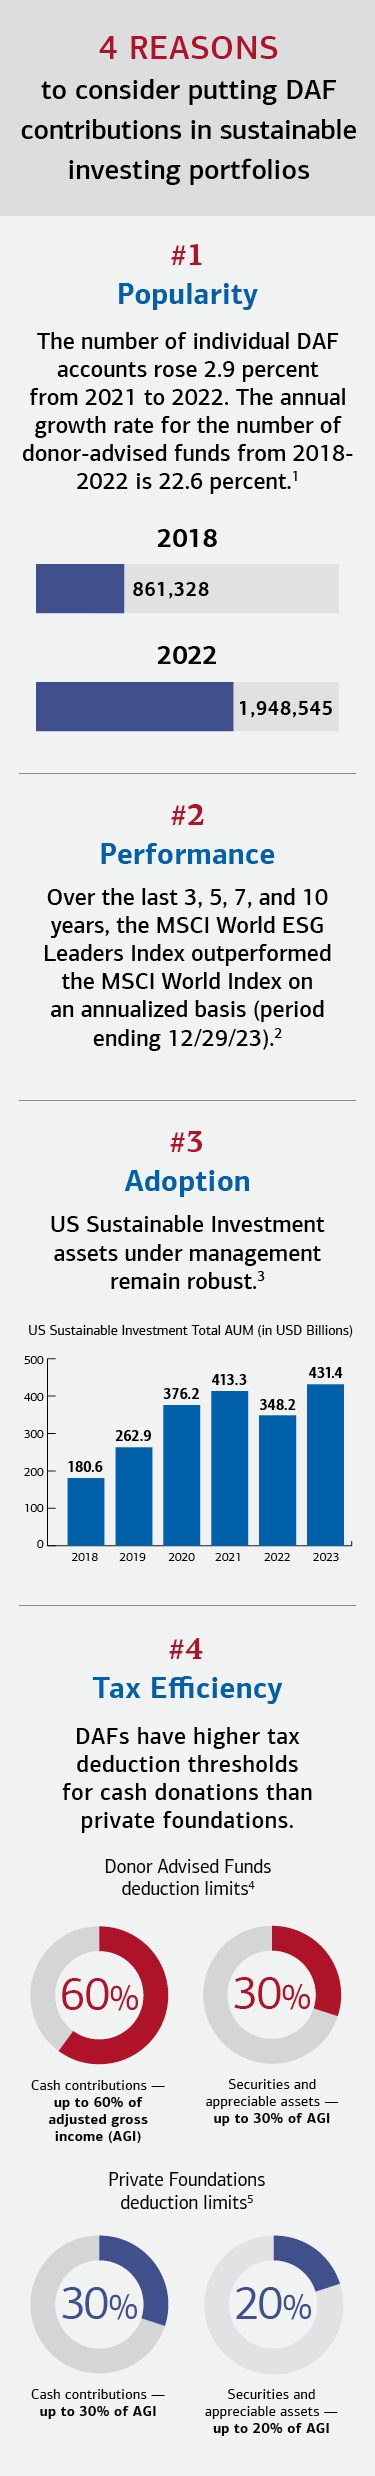 Graphic providing reasons investors should consider putting donor-advised fund (DAF) contributions in sustainable investing portfolios. See link below for complete description.